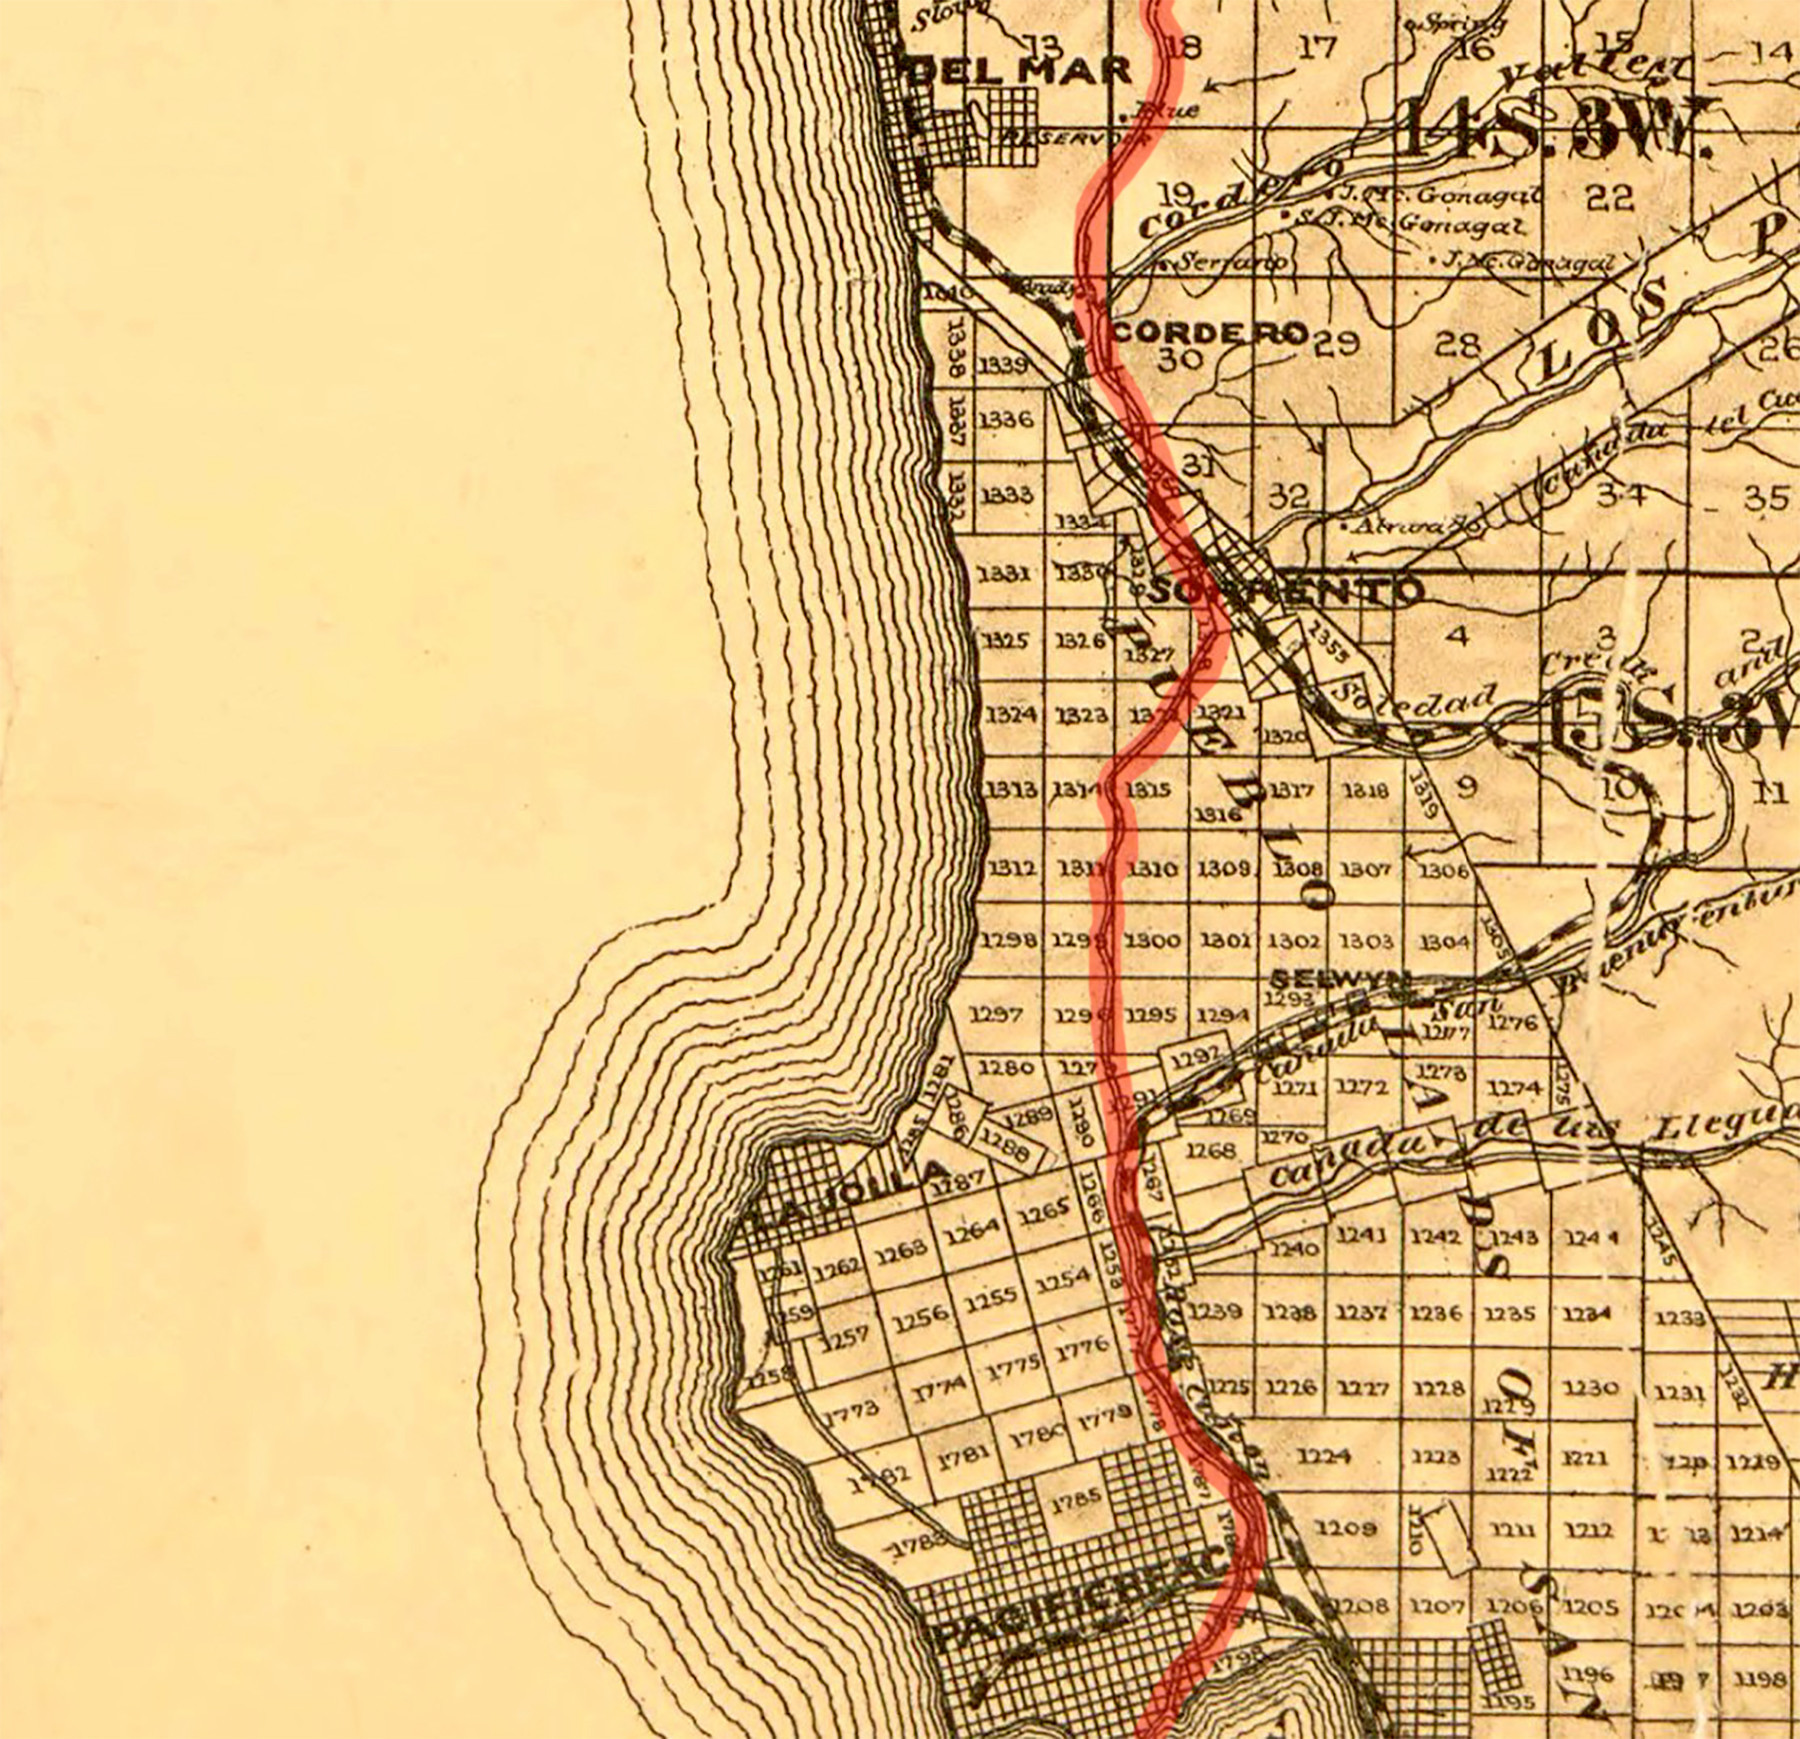 This official survey map of San Diego County was drawn in 1889 by T.D. Beasley, with the old stagecoach road highlighted in red by La Jolla Light graphic designer Daniel Lew.